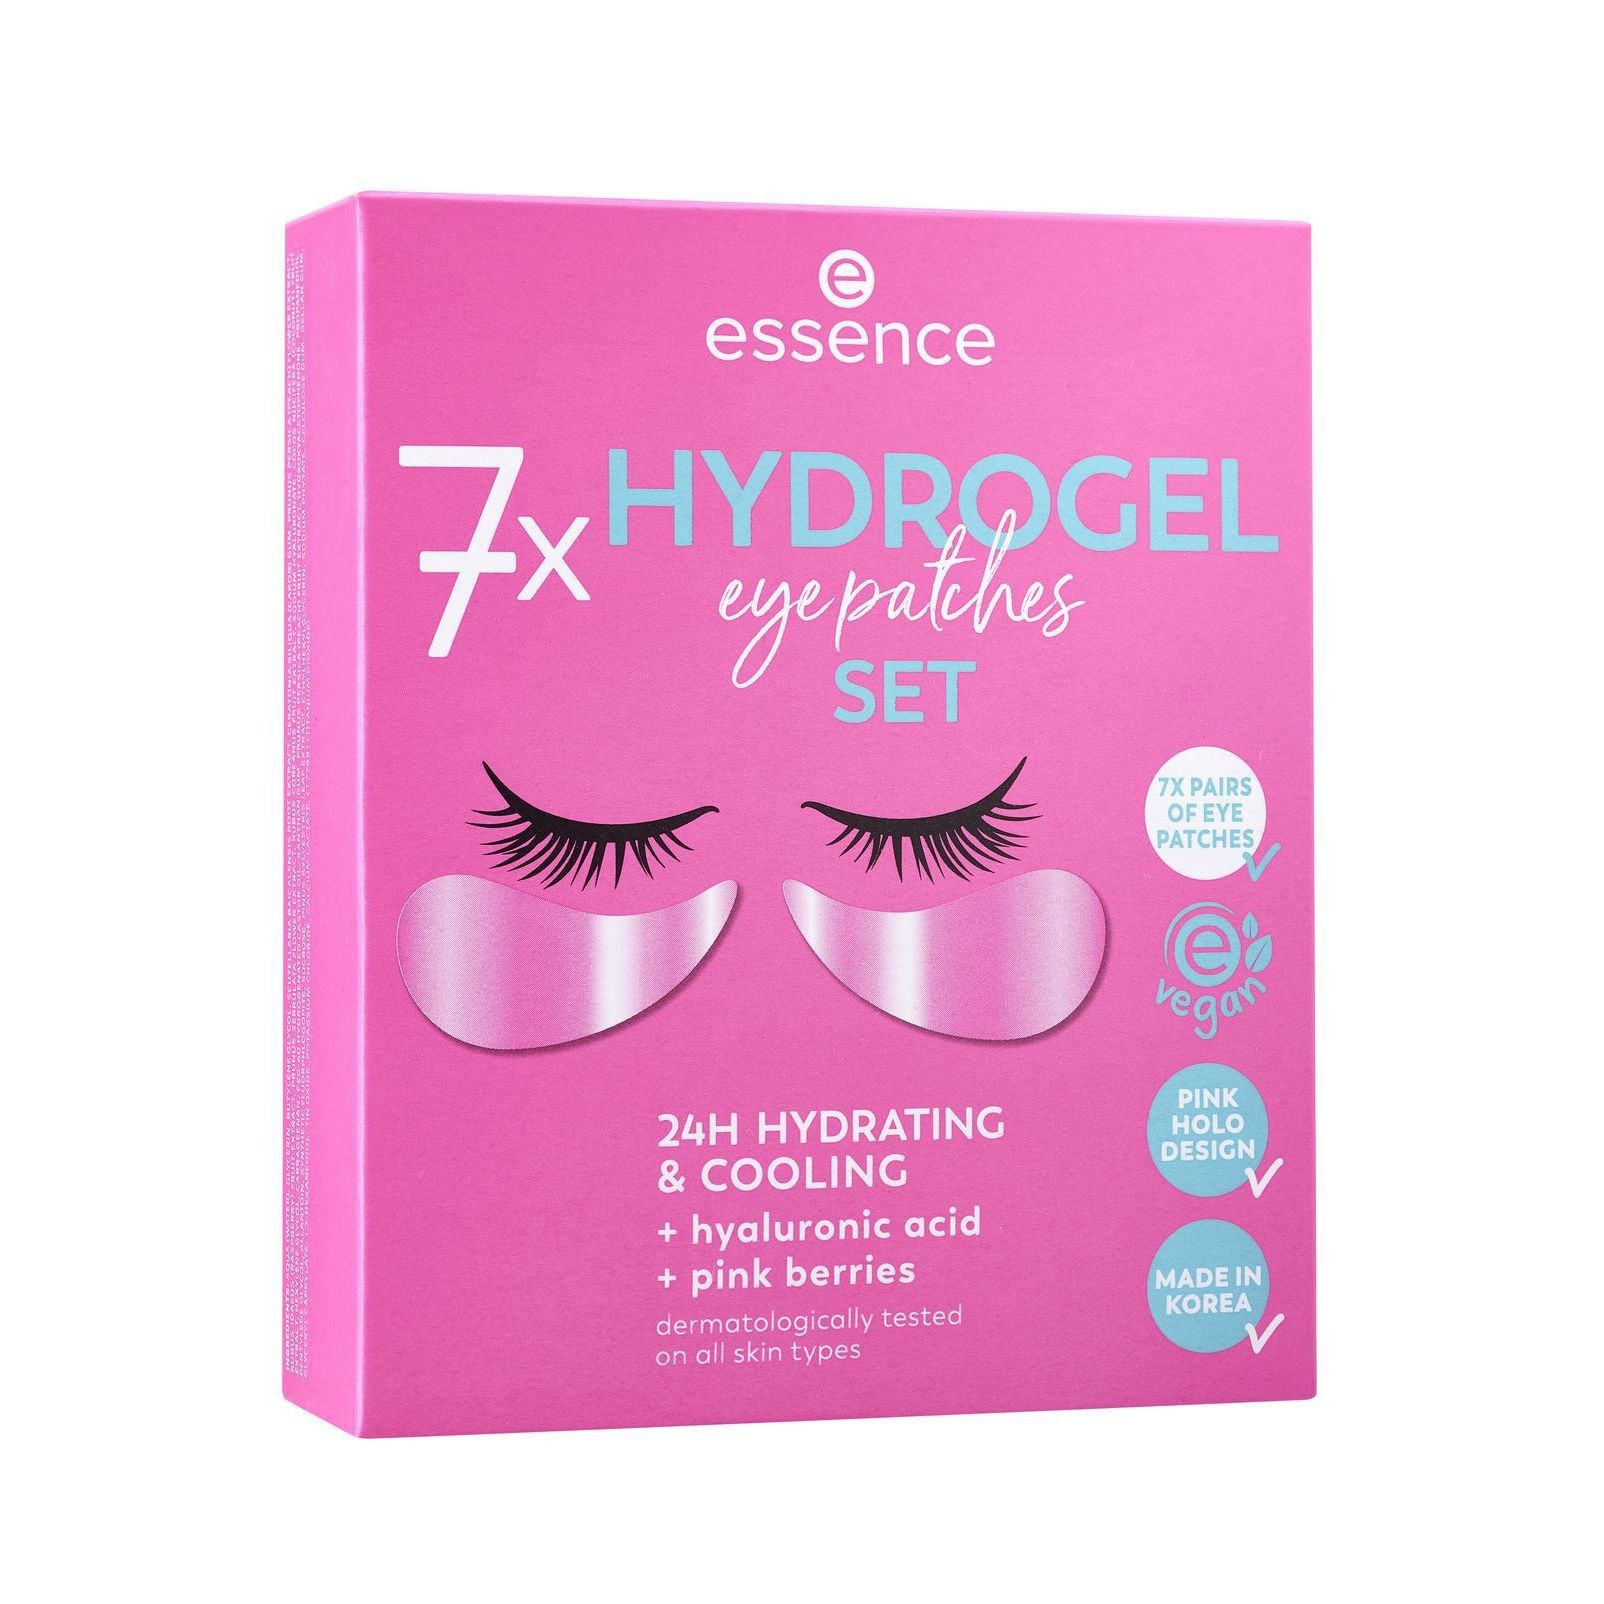 Hydrogel Eye Patches Set (7 Paires)